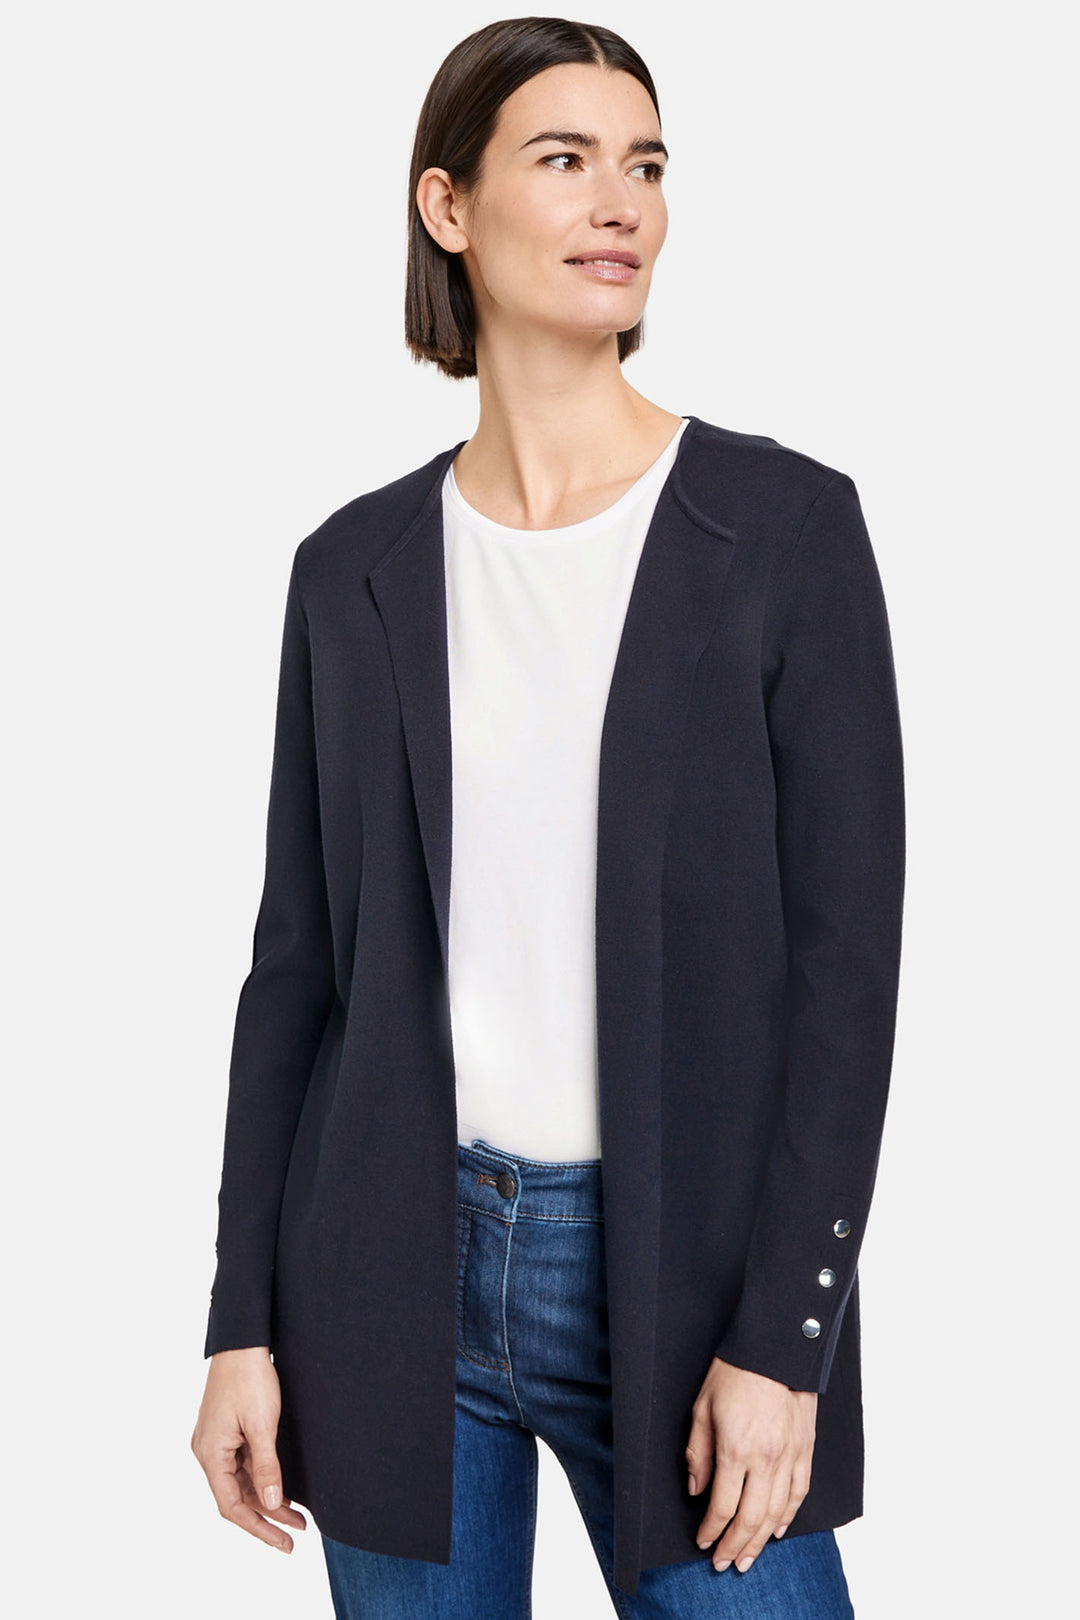 Gerry Weber 935032-44713 Navy Open Front Round Neck Cardigan - Dotique Chesterfield